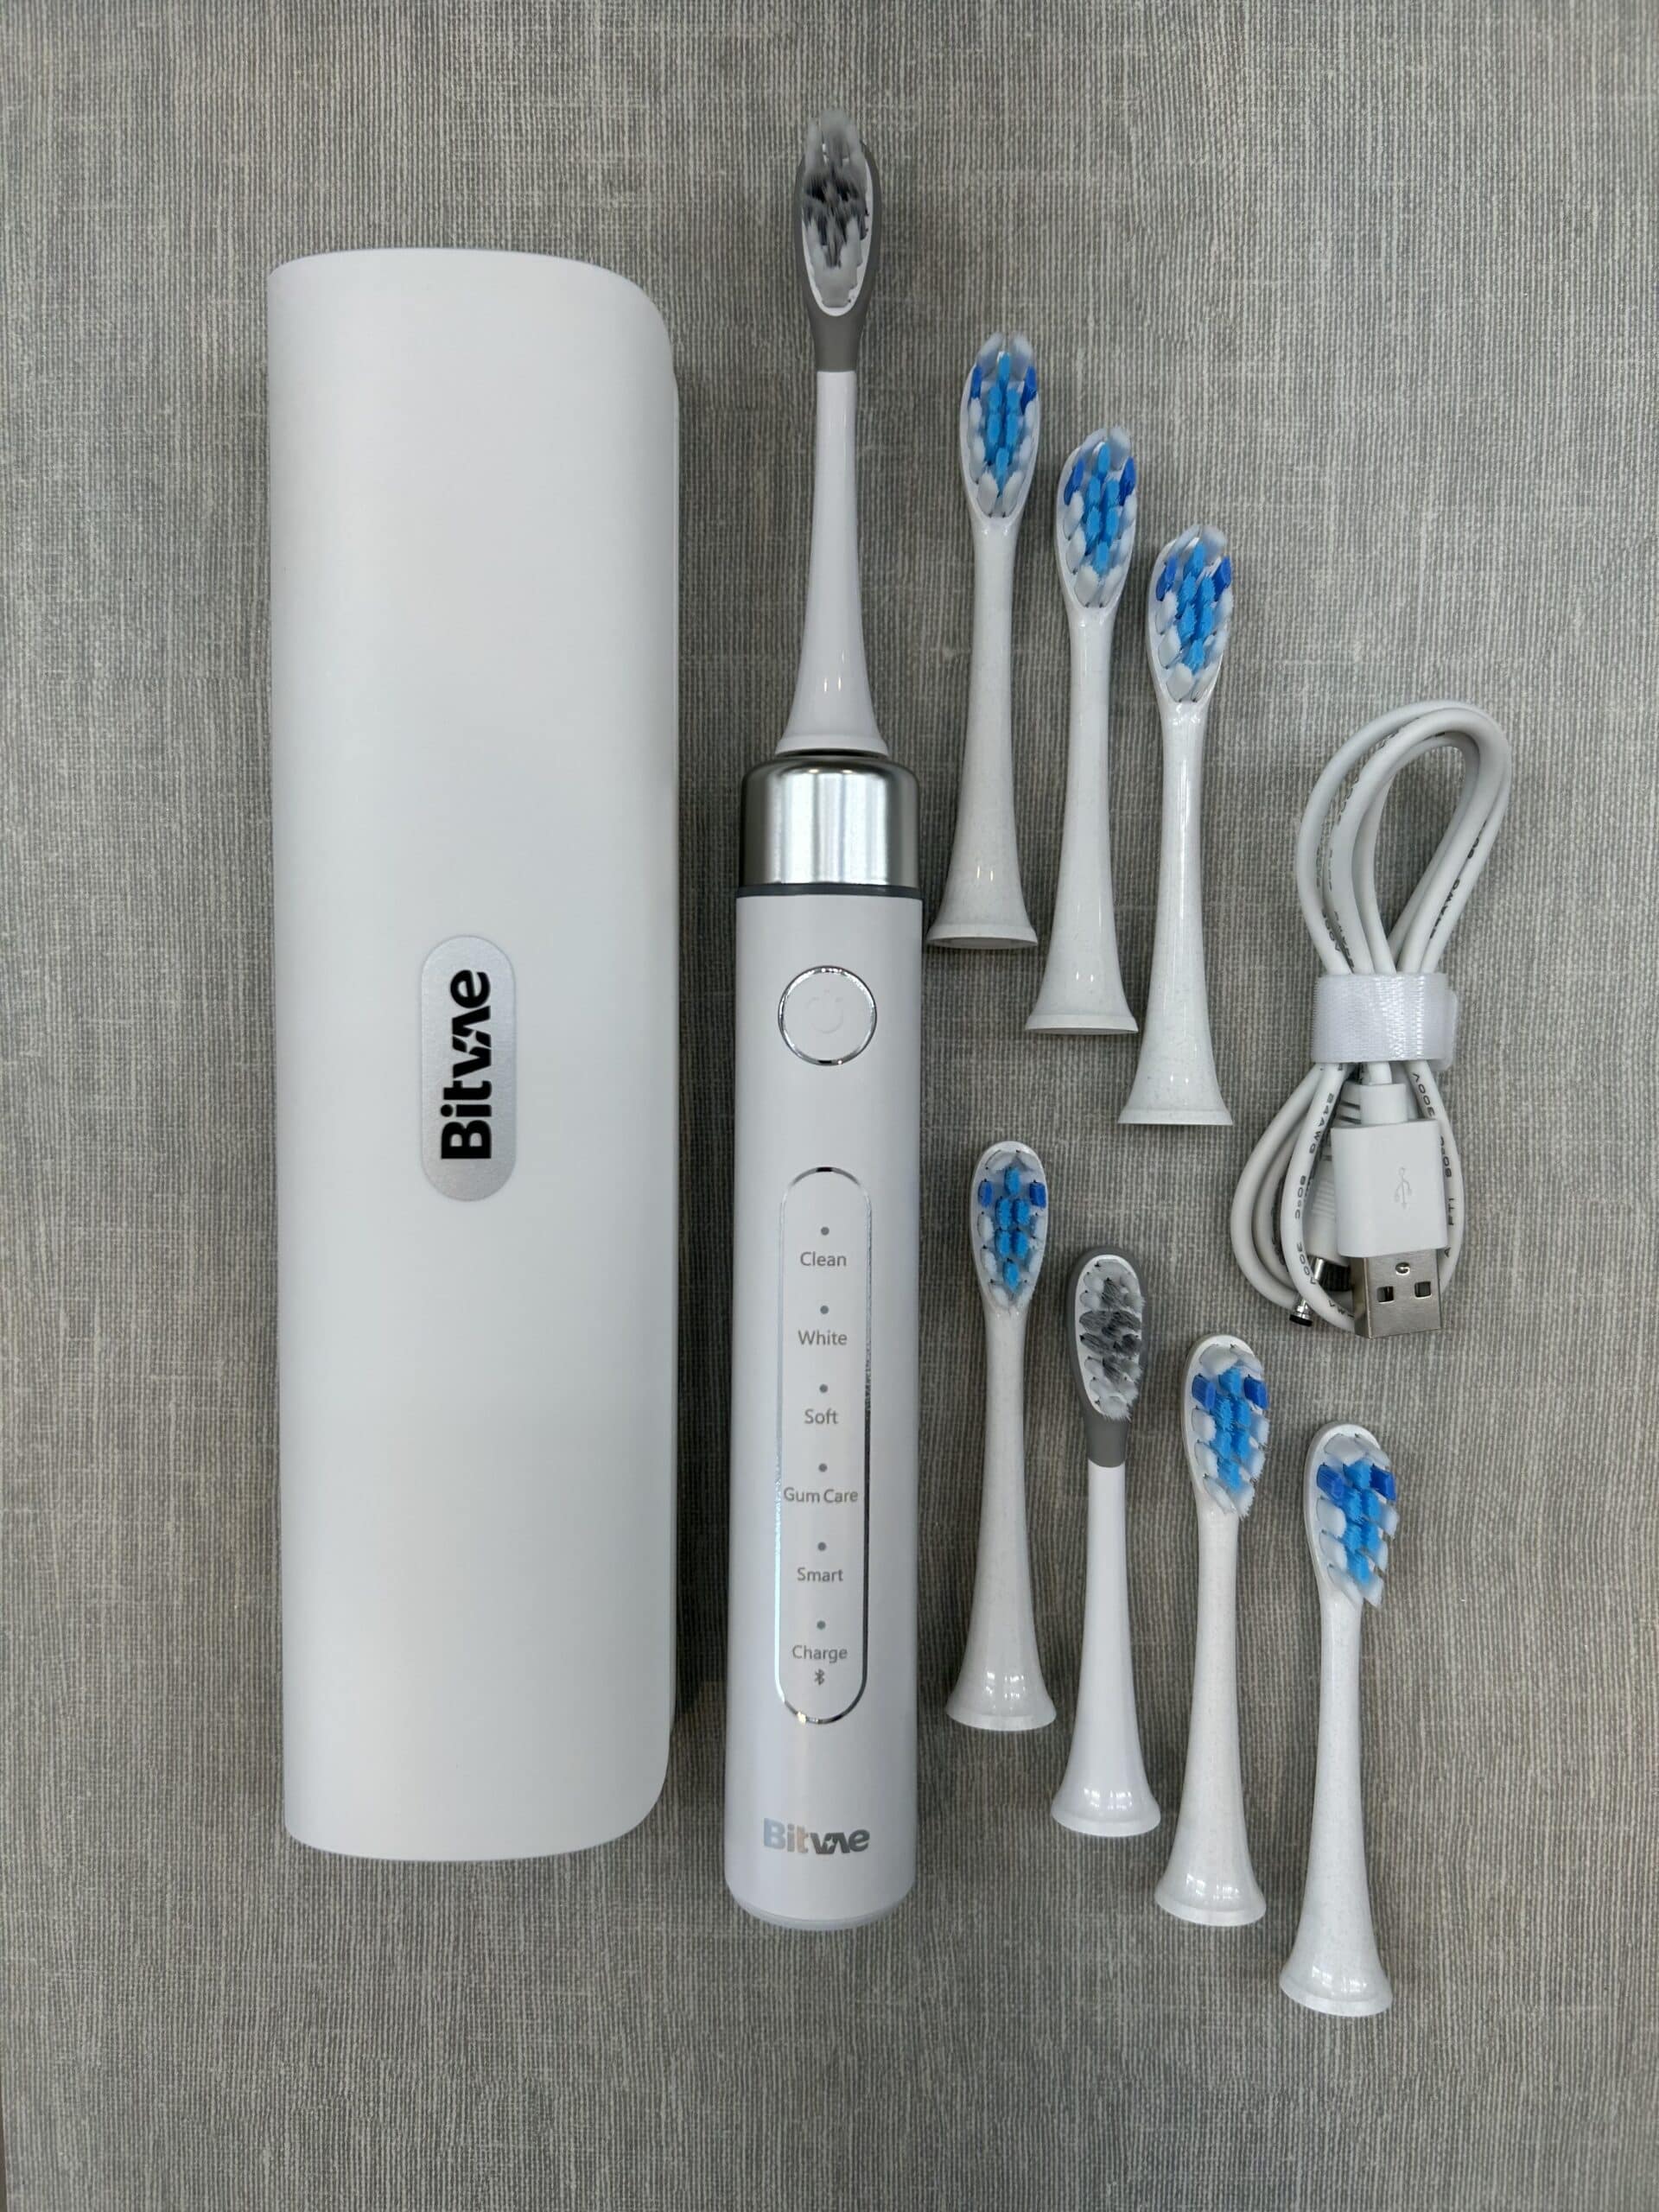 Bitvae S2 Ultrasonic Electric Toothbrush Review | My Dental Advocate